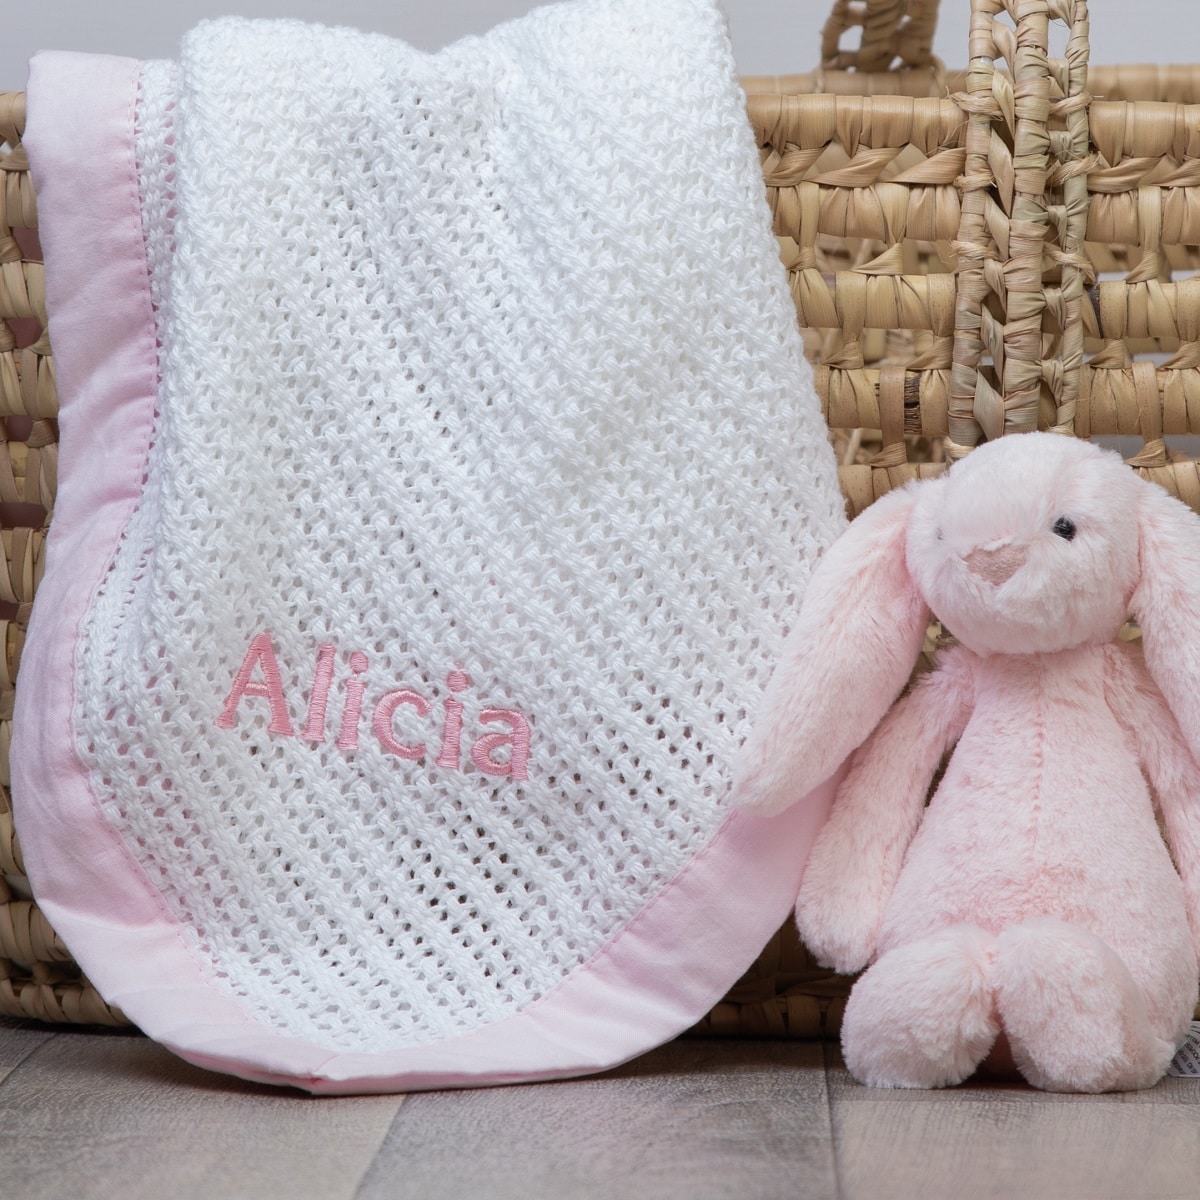 Ziggle personalised white cellular baby blanket with pink trim